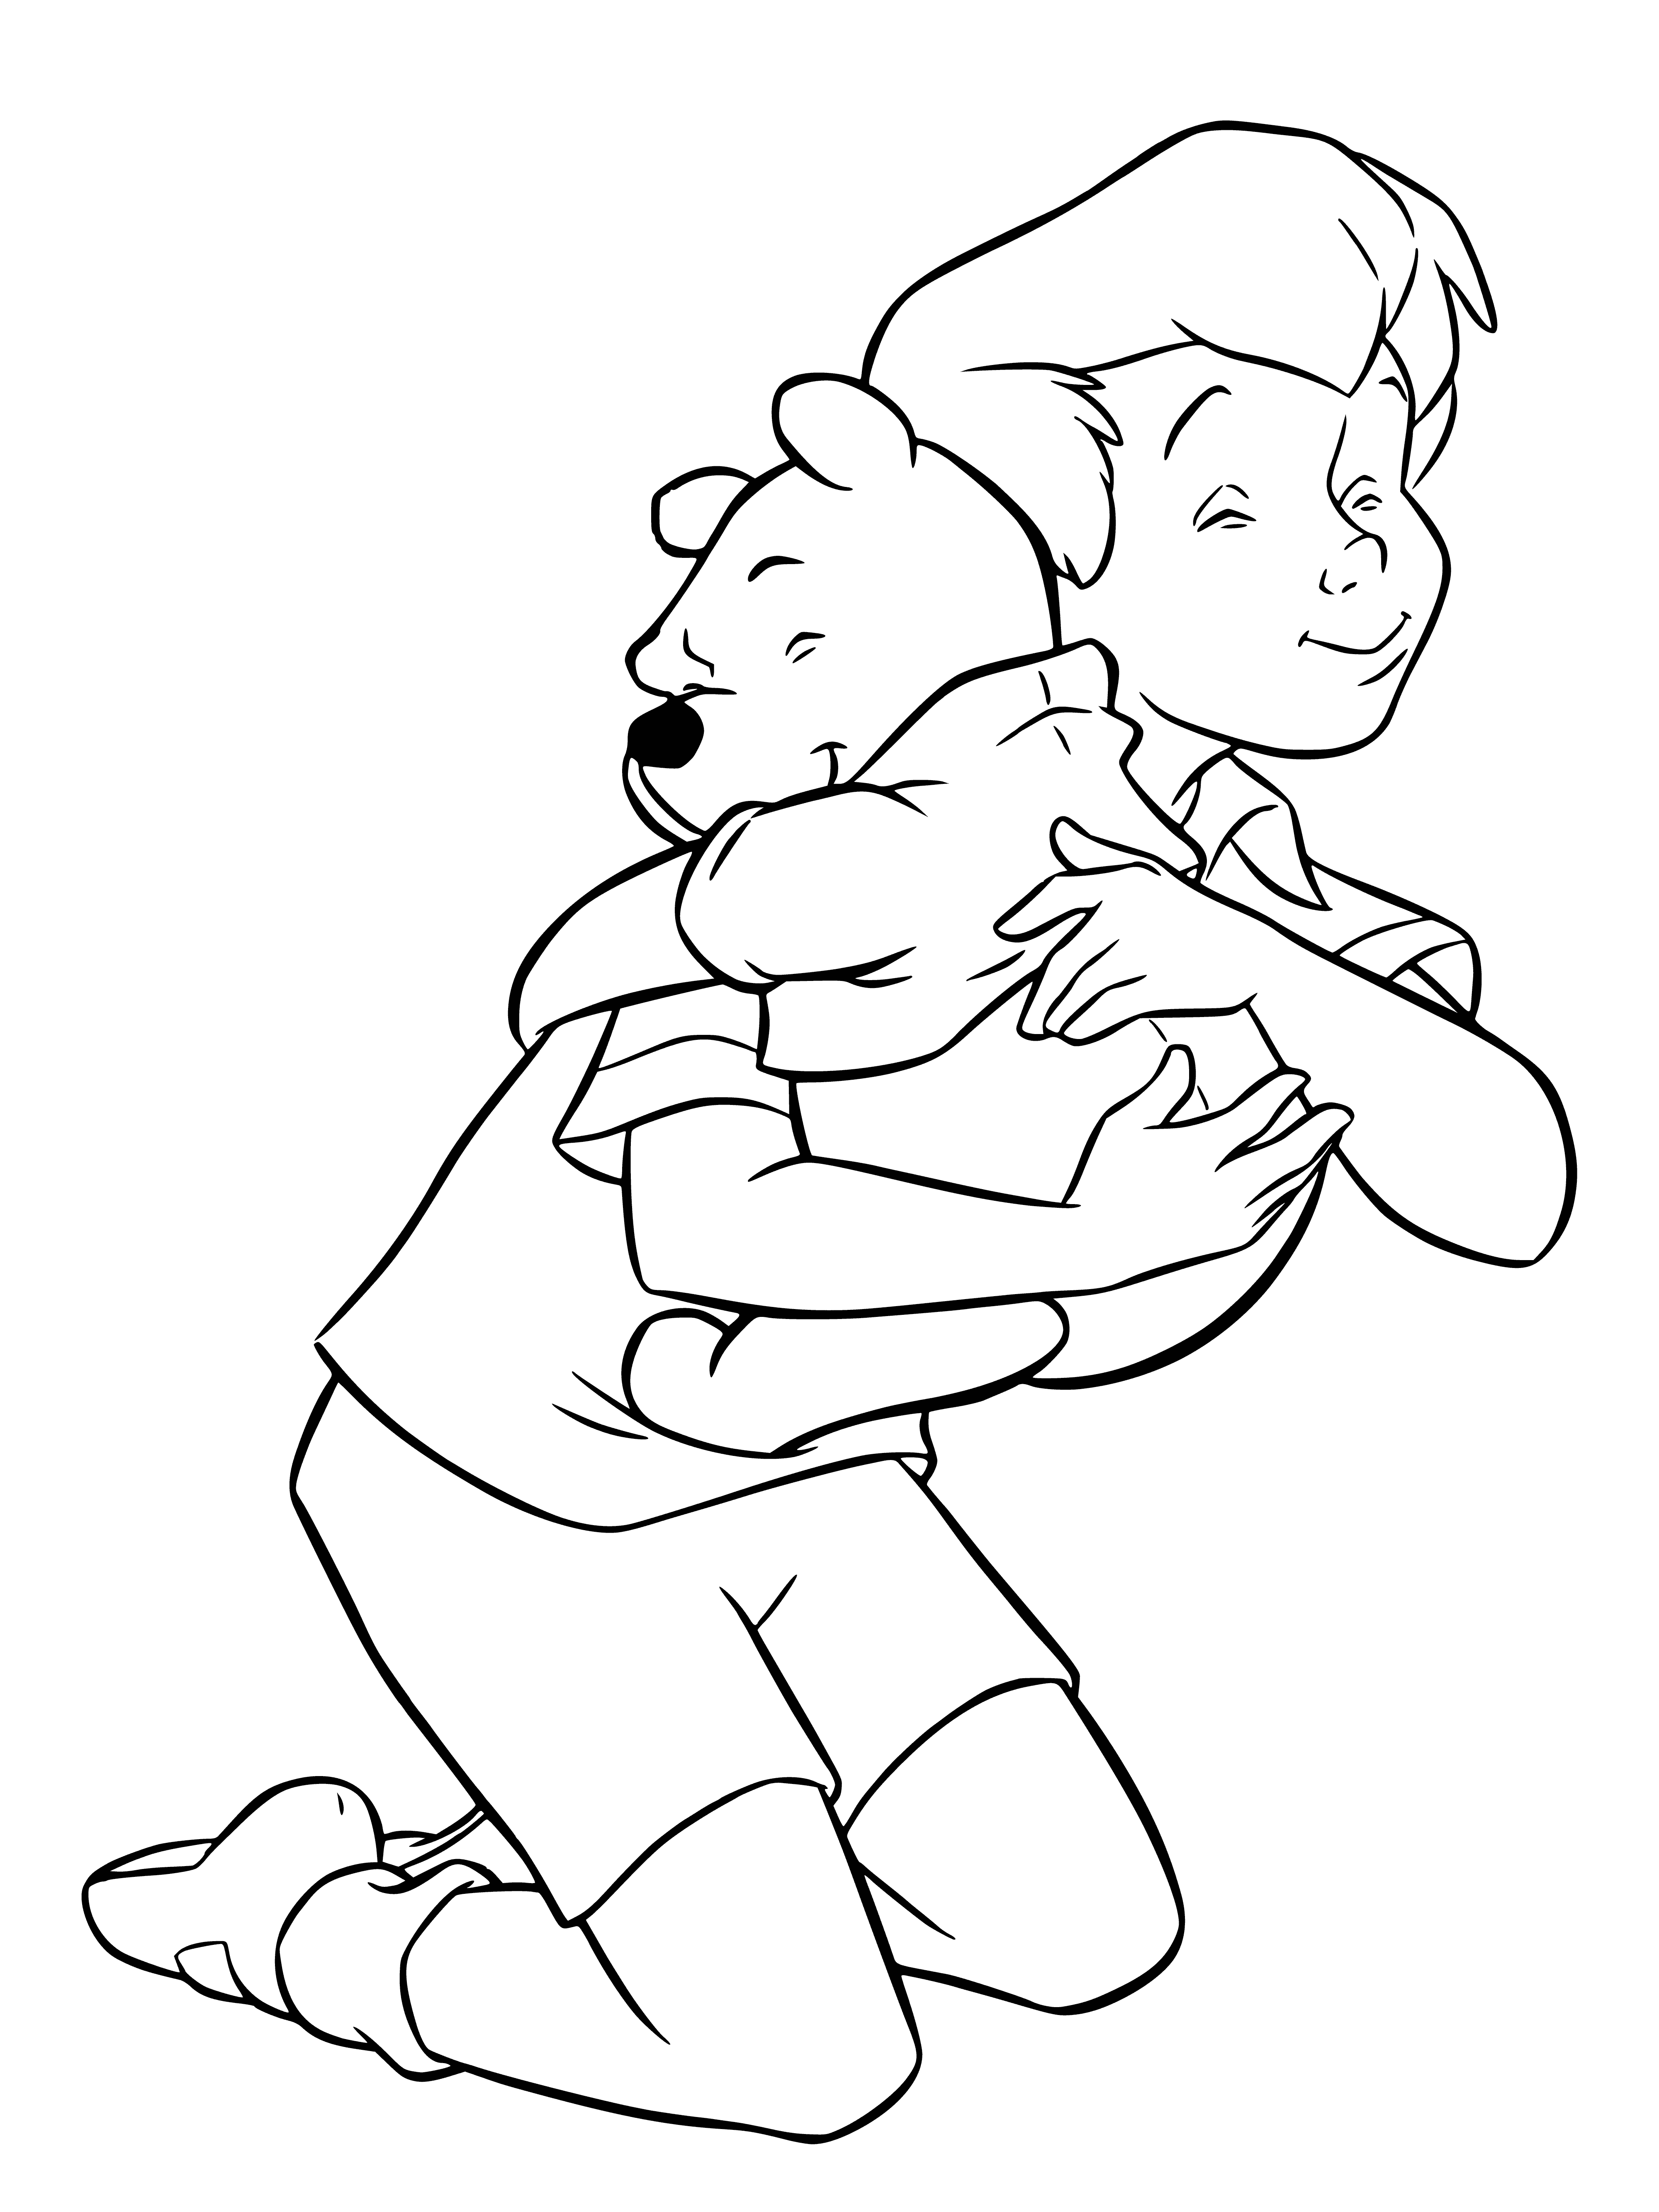 Christopher Robin and Vinnie coloring page